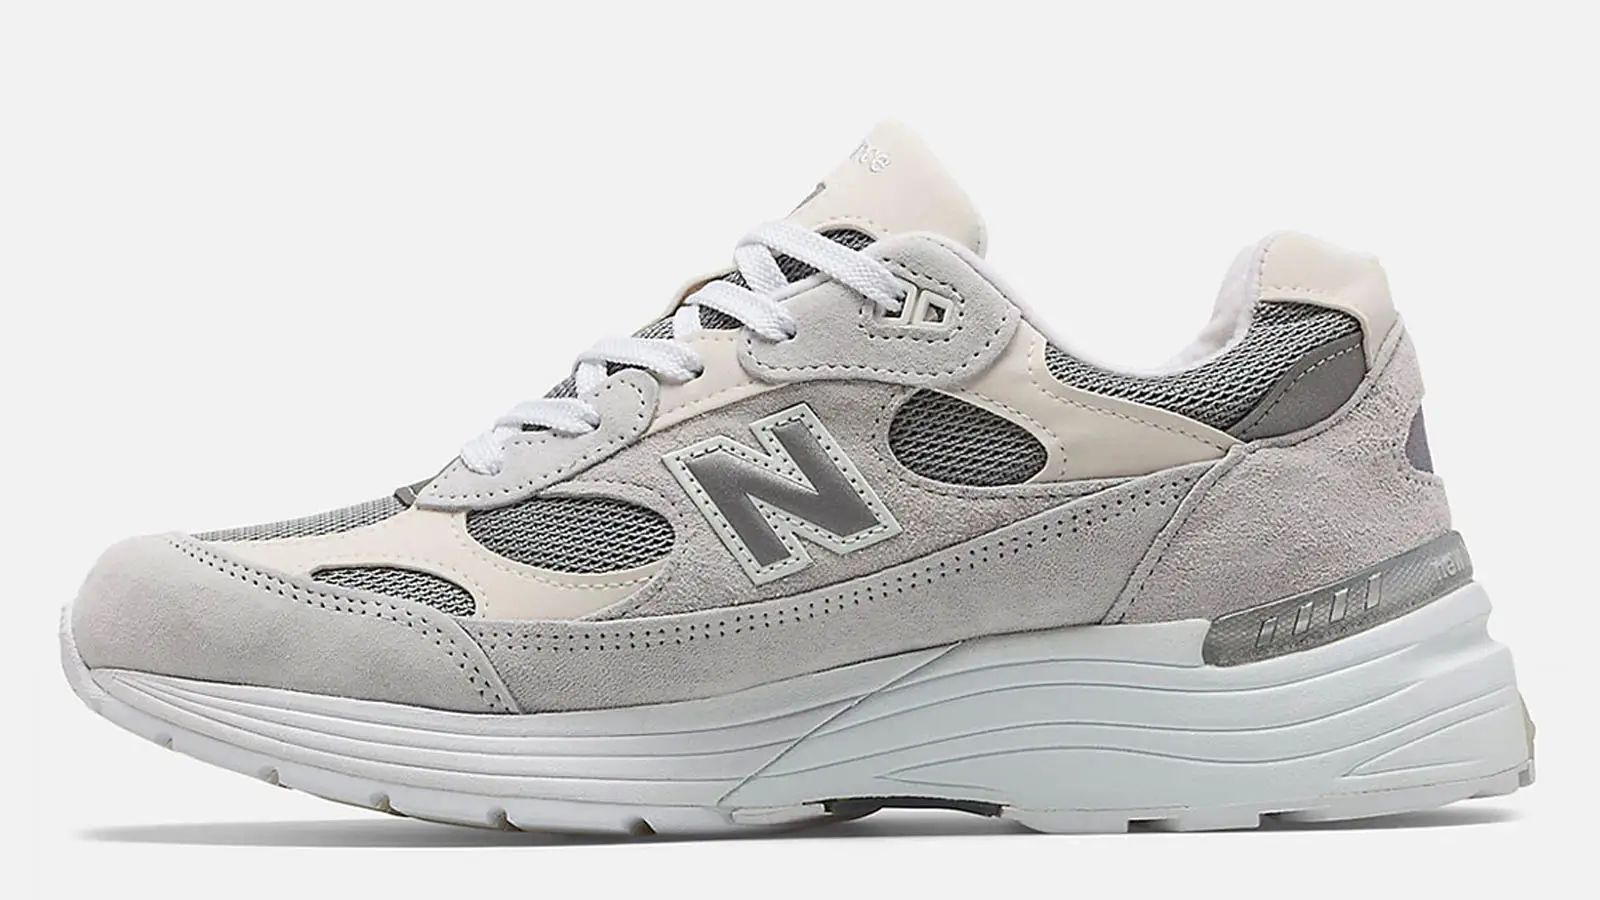 The New Balance 992 “Nimbus Cloud” Looks Super Luxe | The Sole 